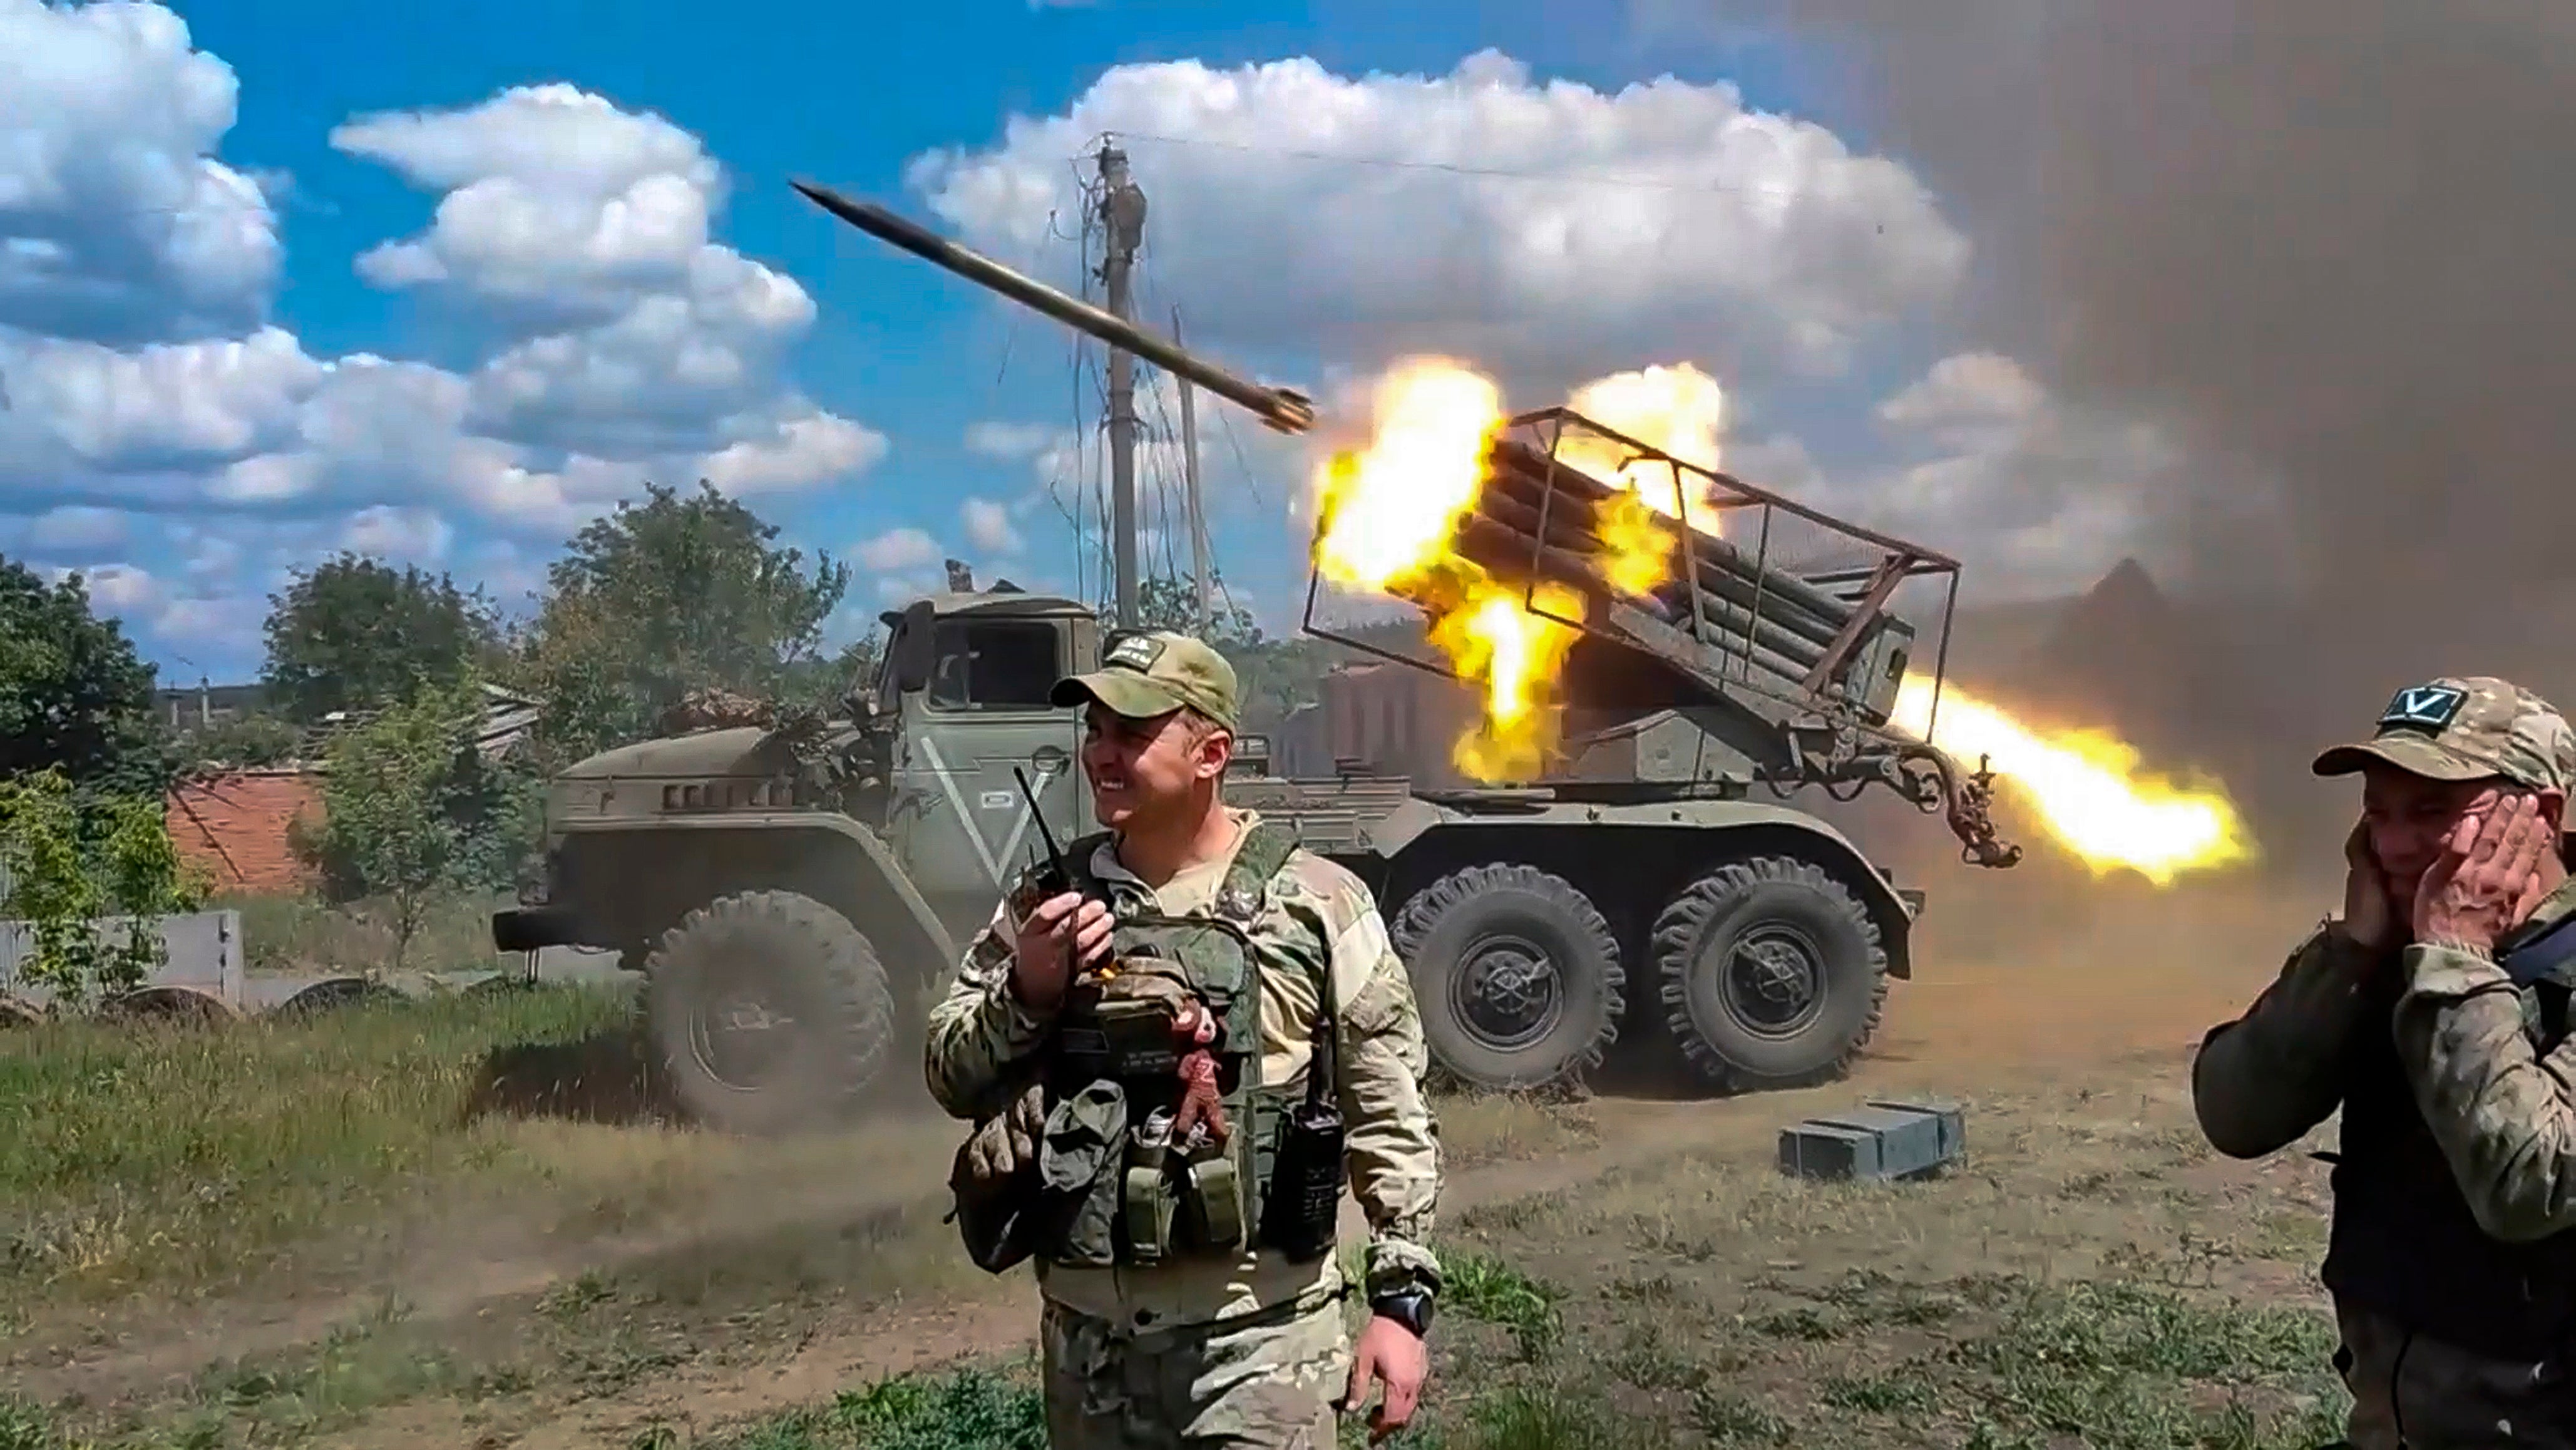 Russian soldiers fire from a BM-21 